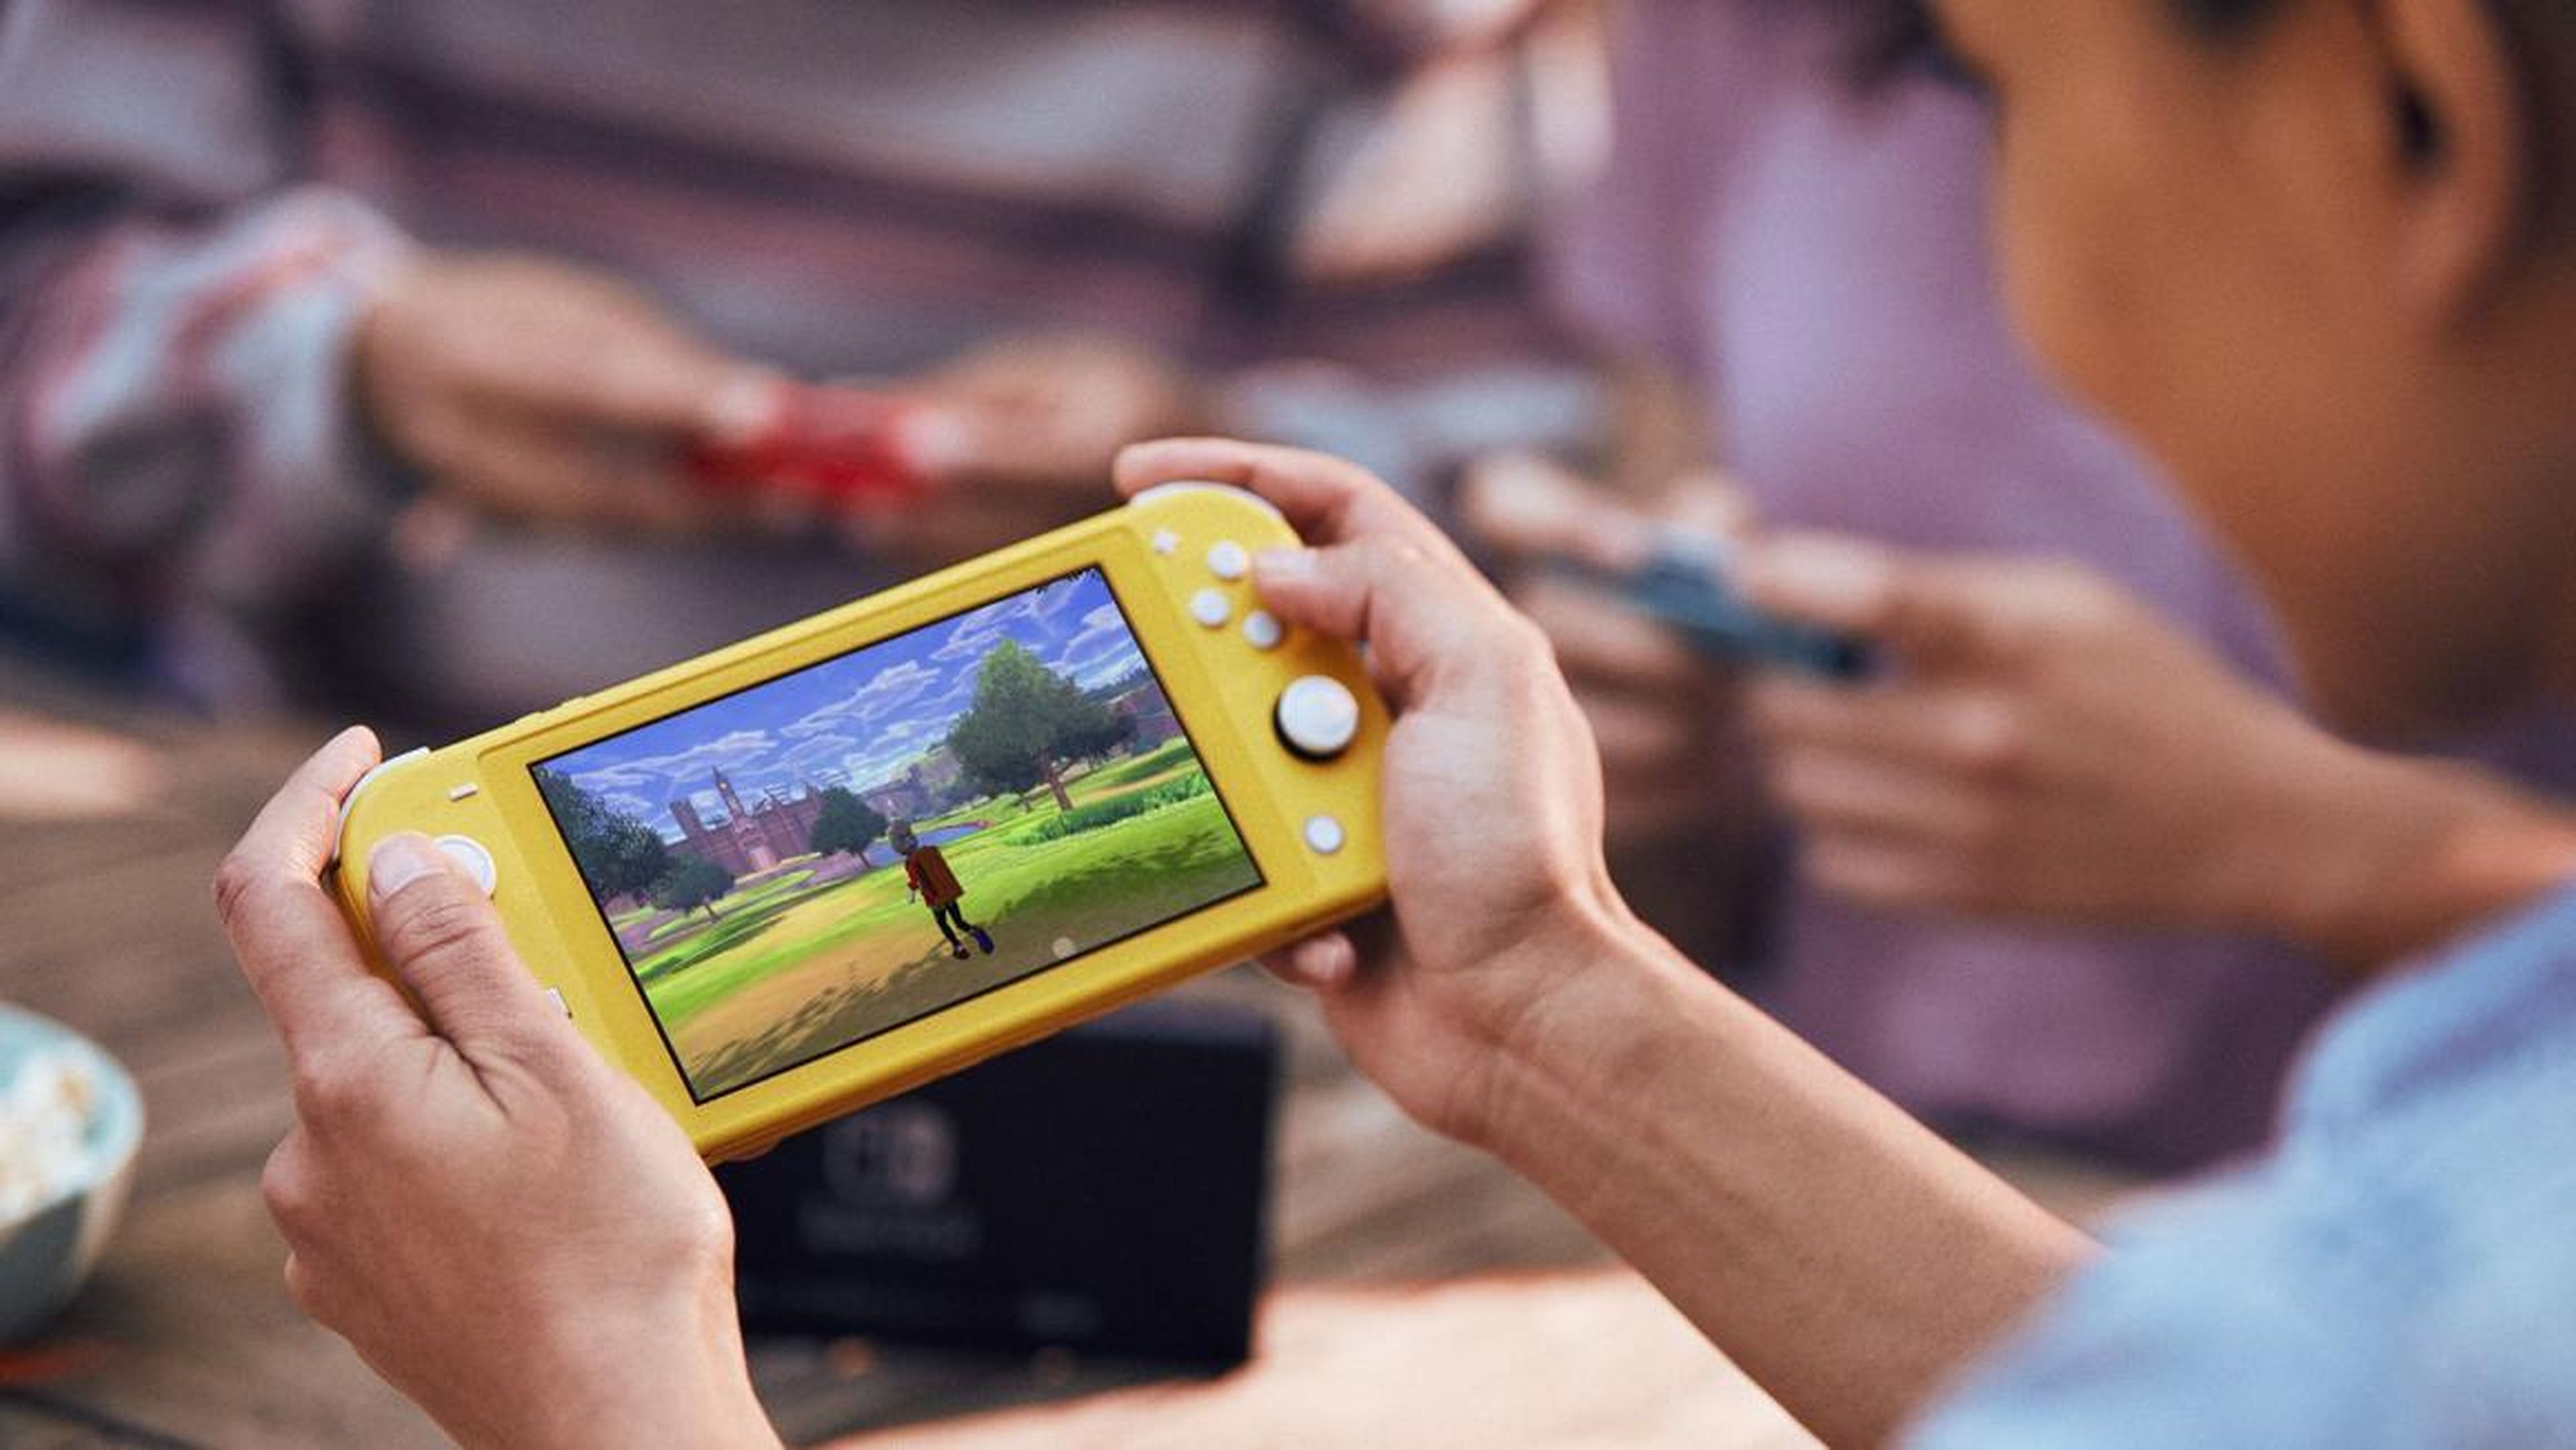 1. The Nintendo Switch Lite costs $100 less because it's a portable-only console.